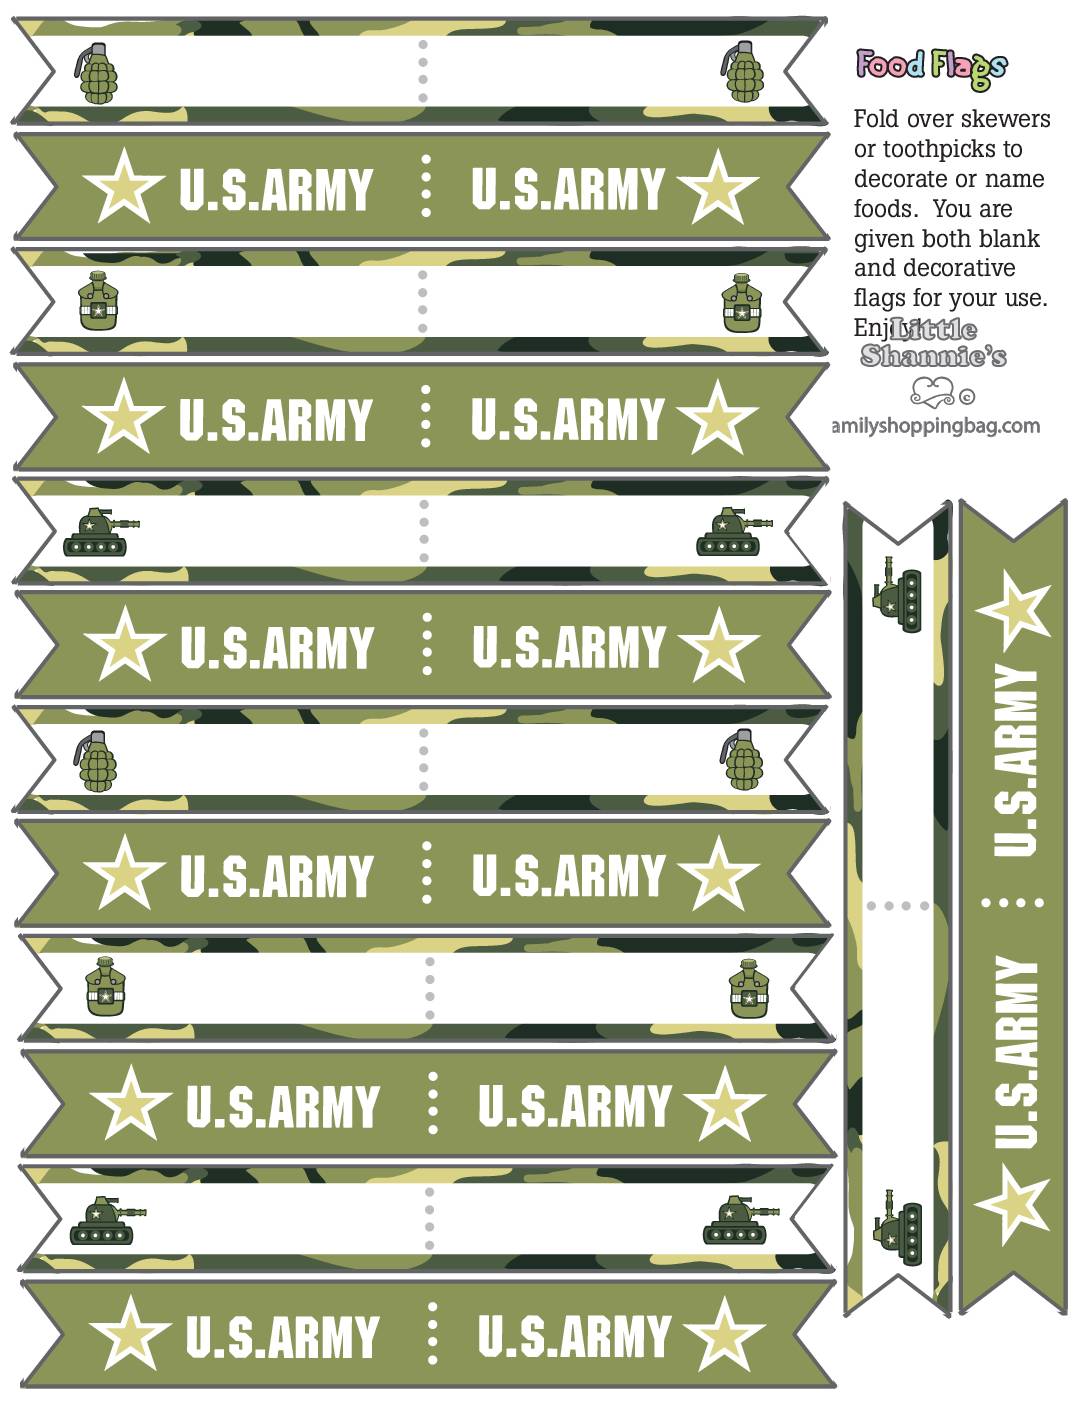 Food Flags army Cupcake Wrappers